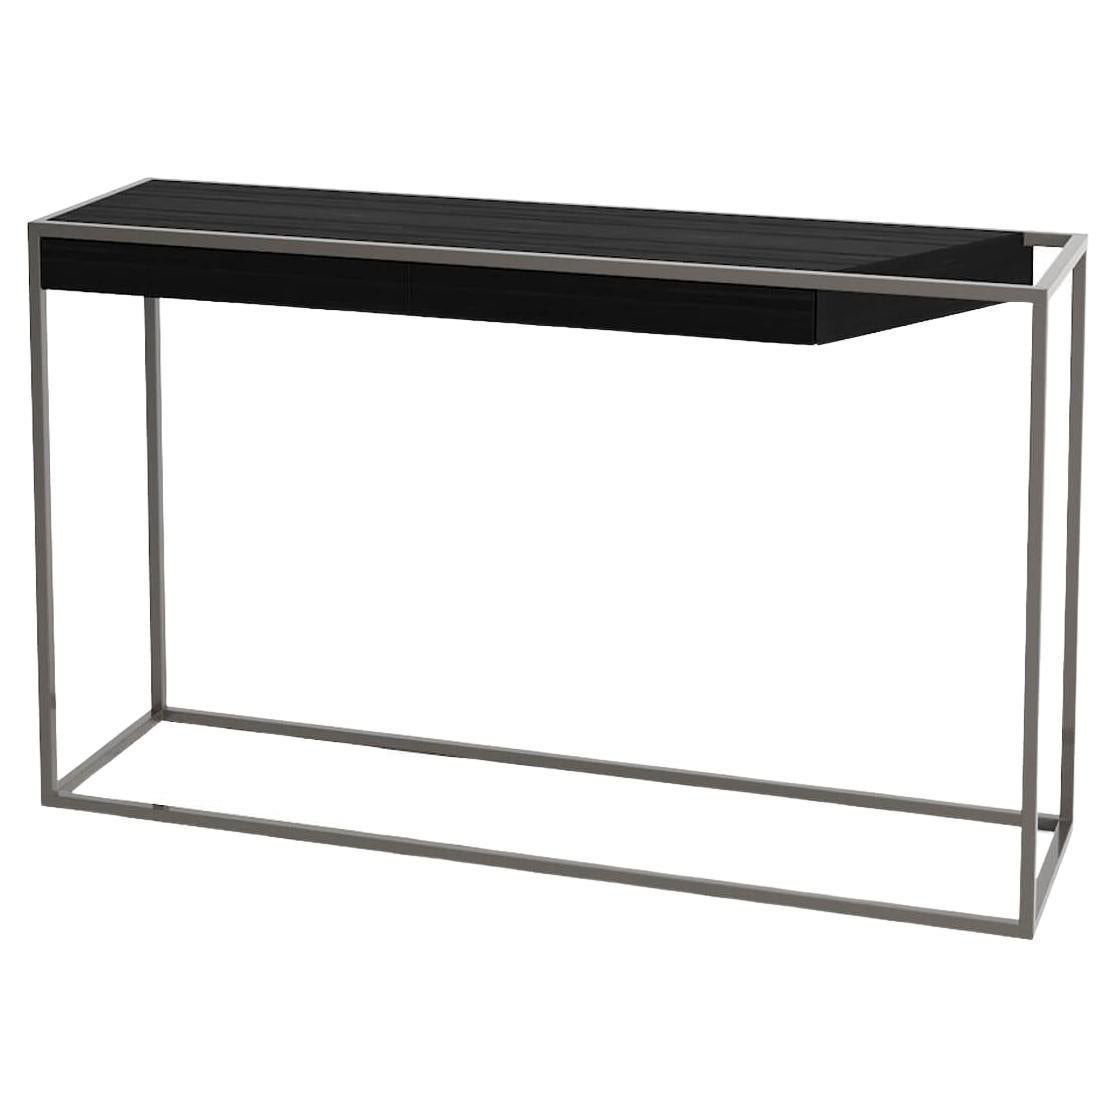 Modern Minimalist Rectangular Console Table Black Oak Wood and Black Lacquer For Sale